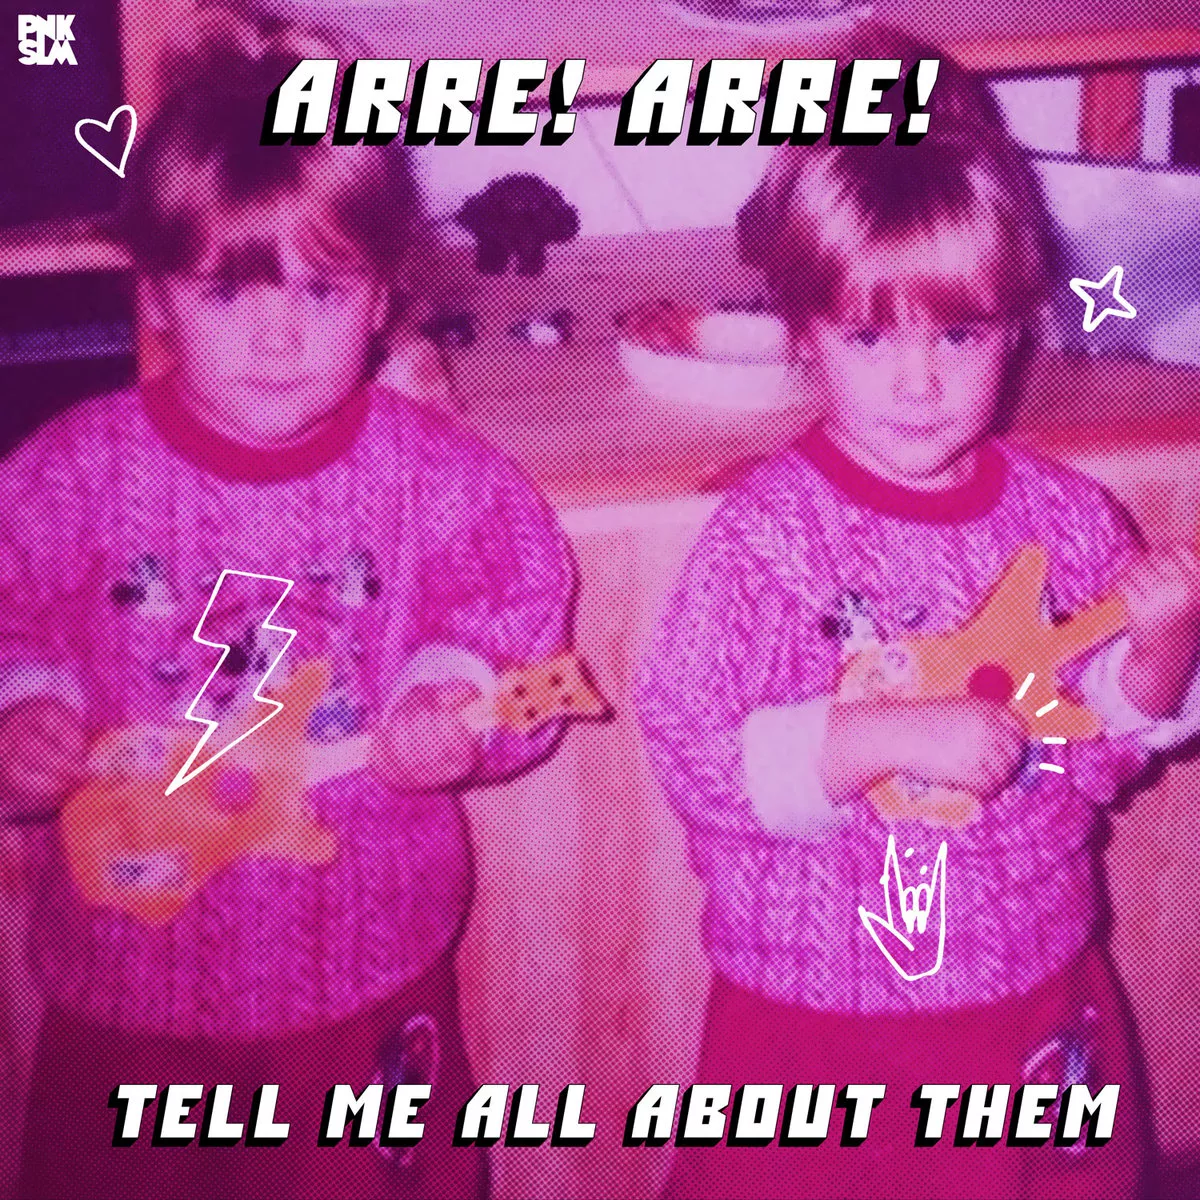 Tell Me All About Them - Arre! Arre!